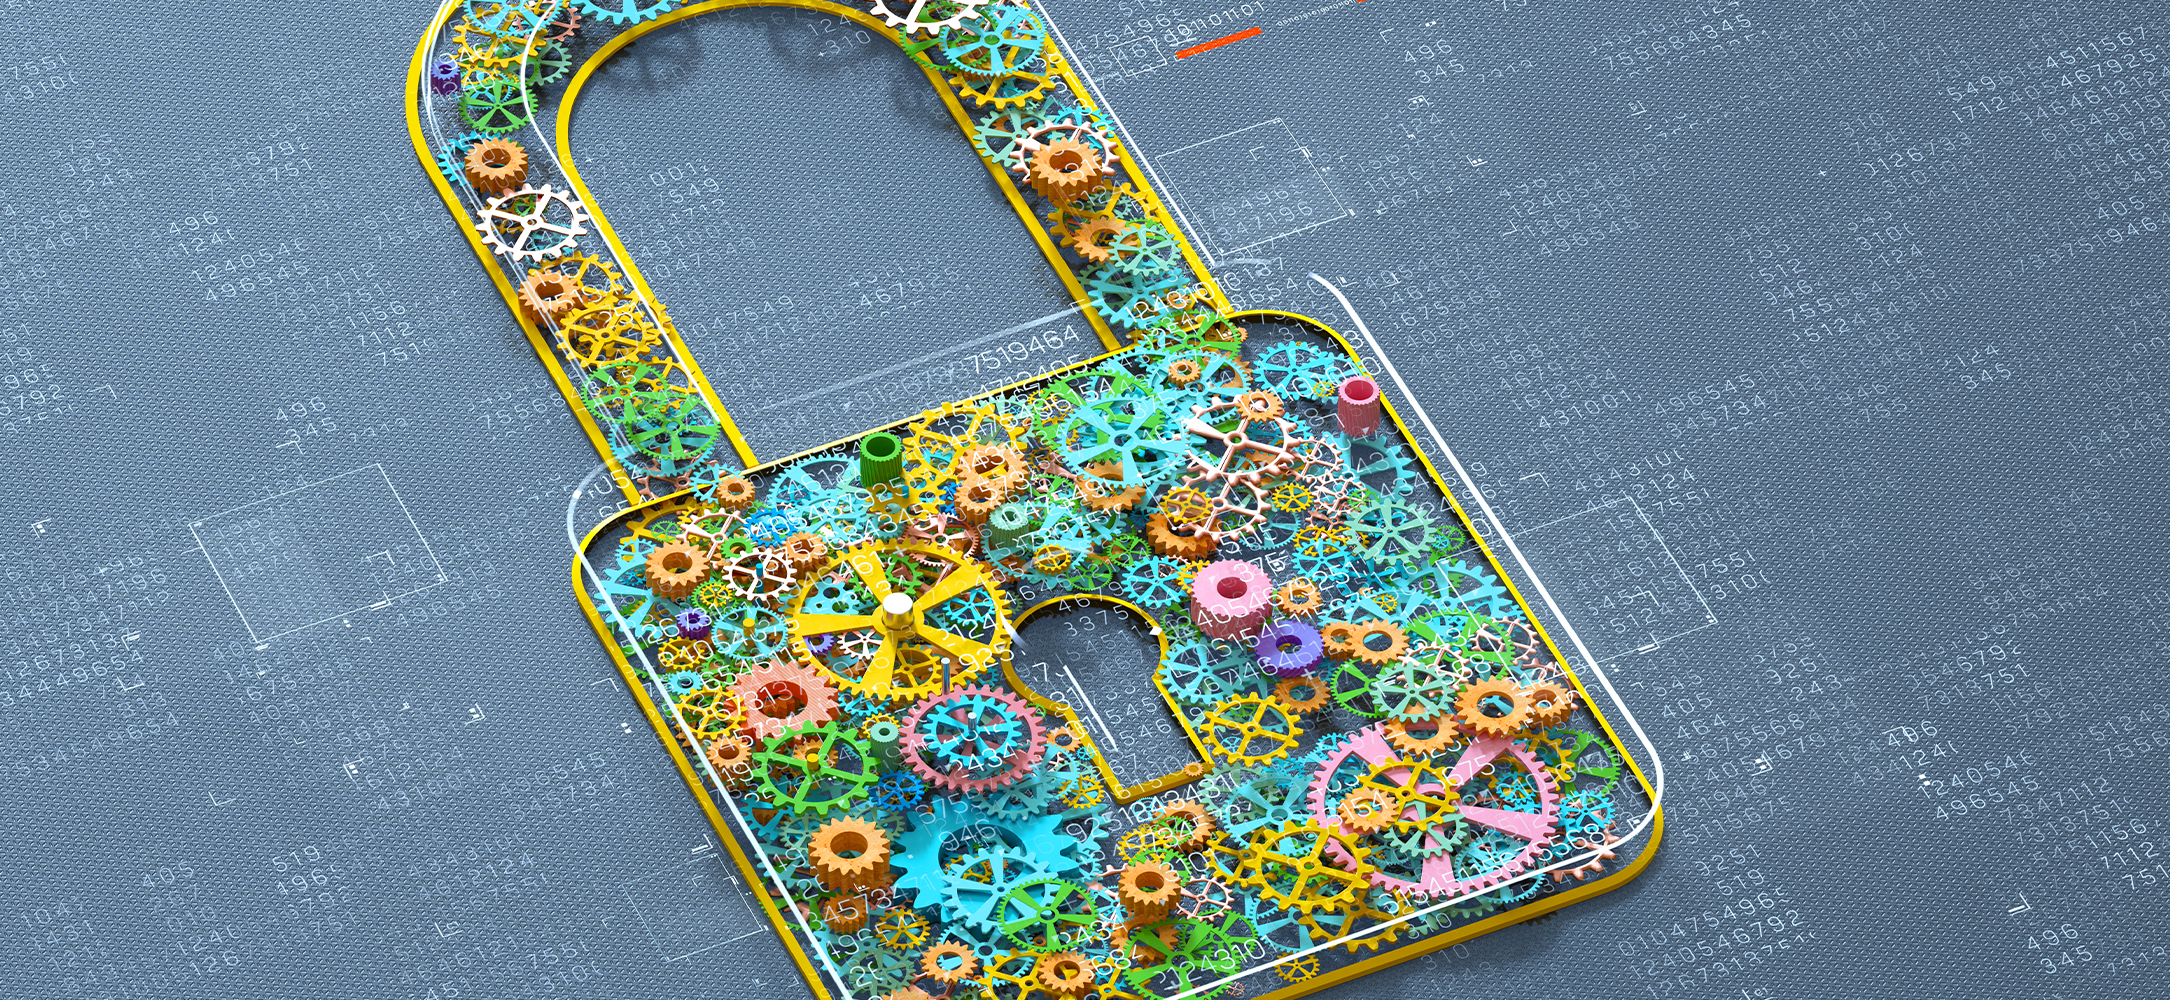 Illustrative 3D lock with multicolored gears inside, representing data governance, data security